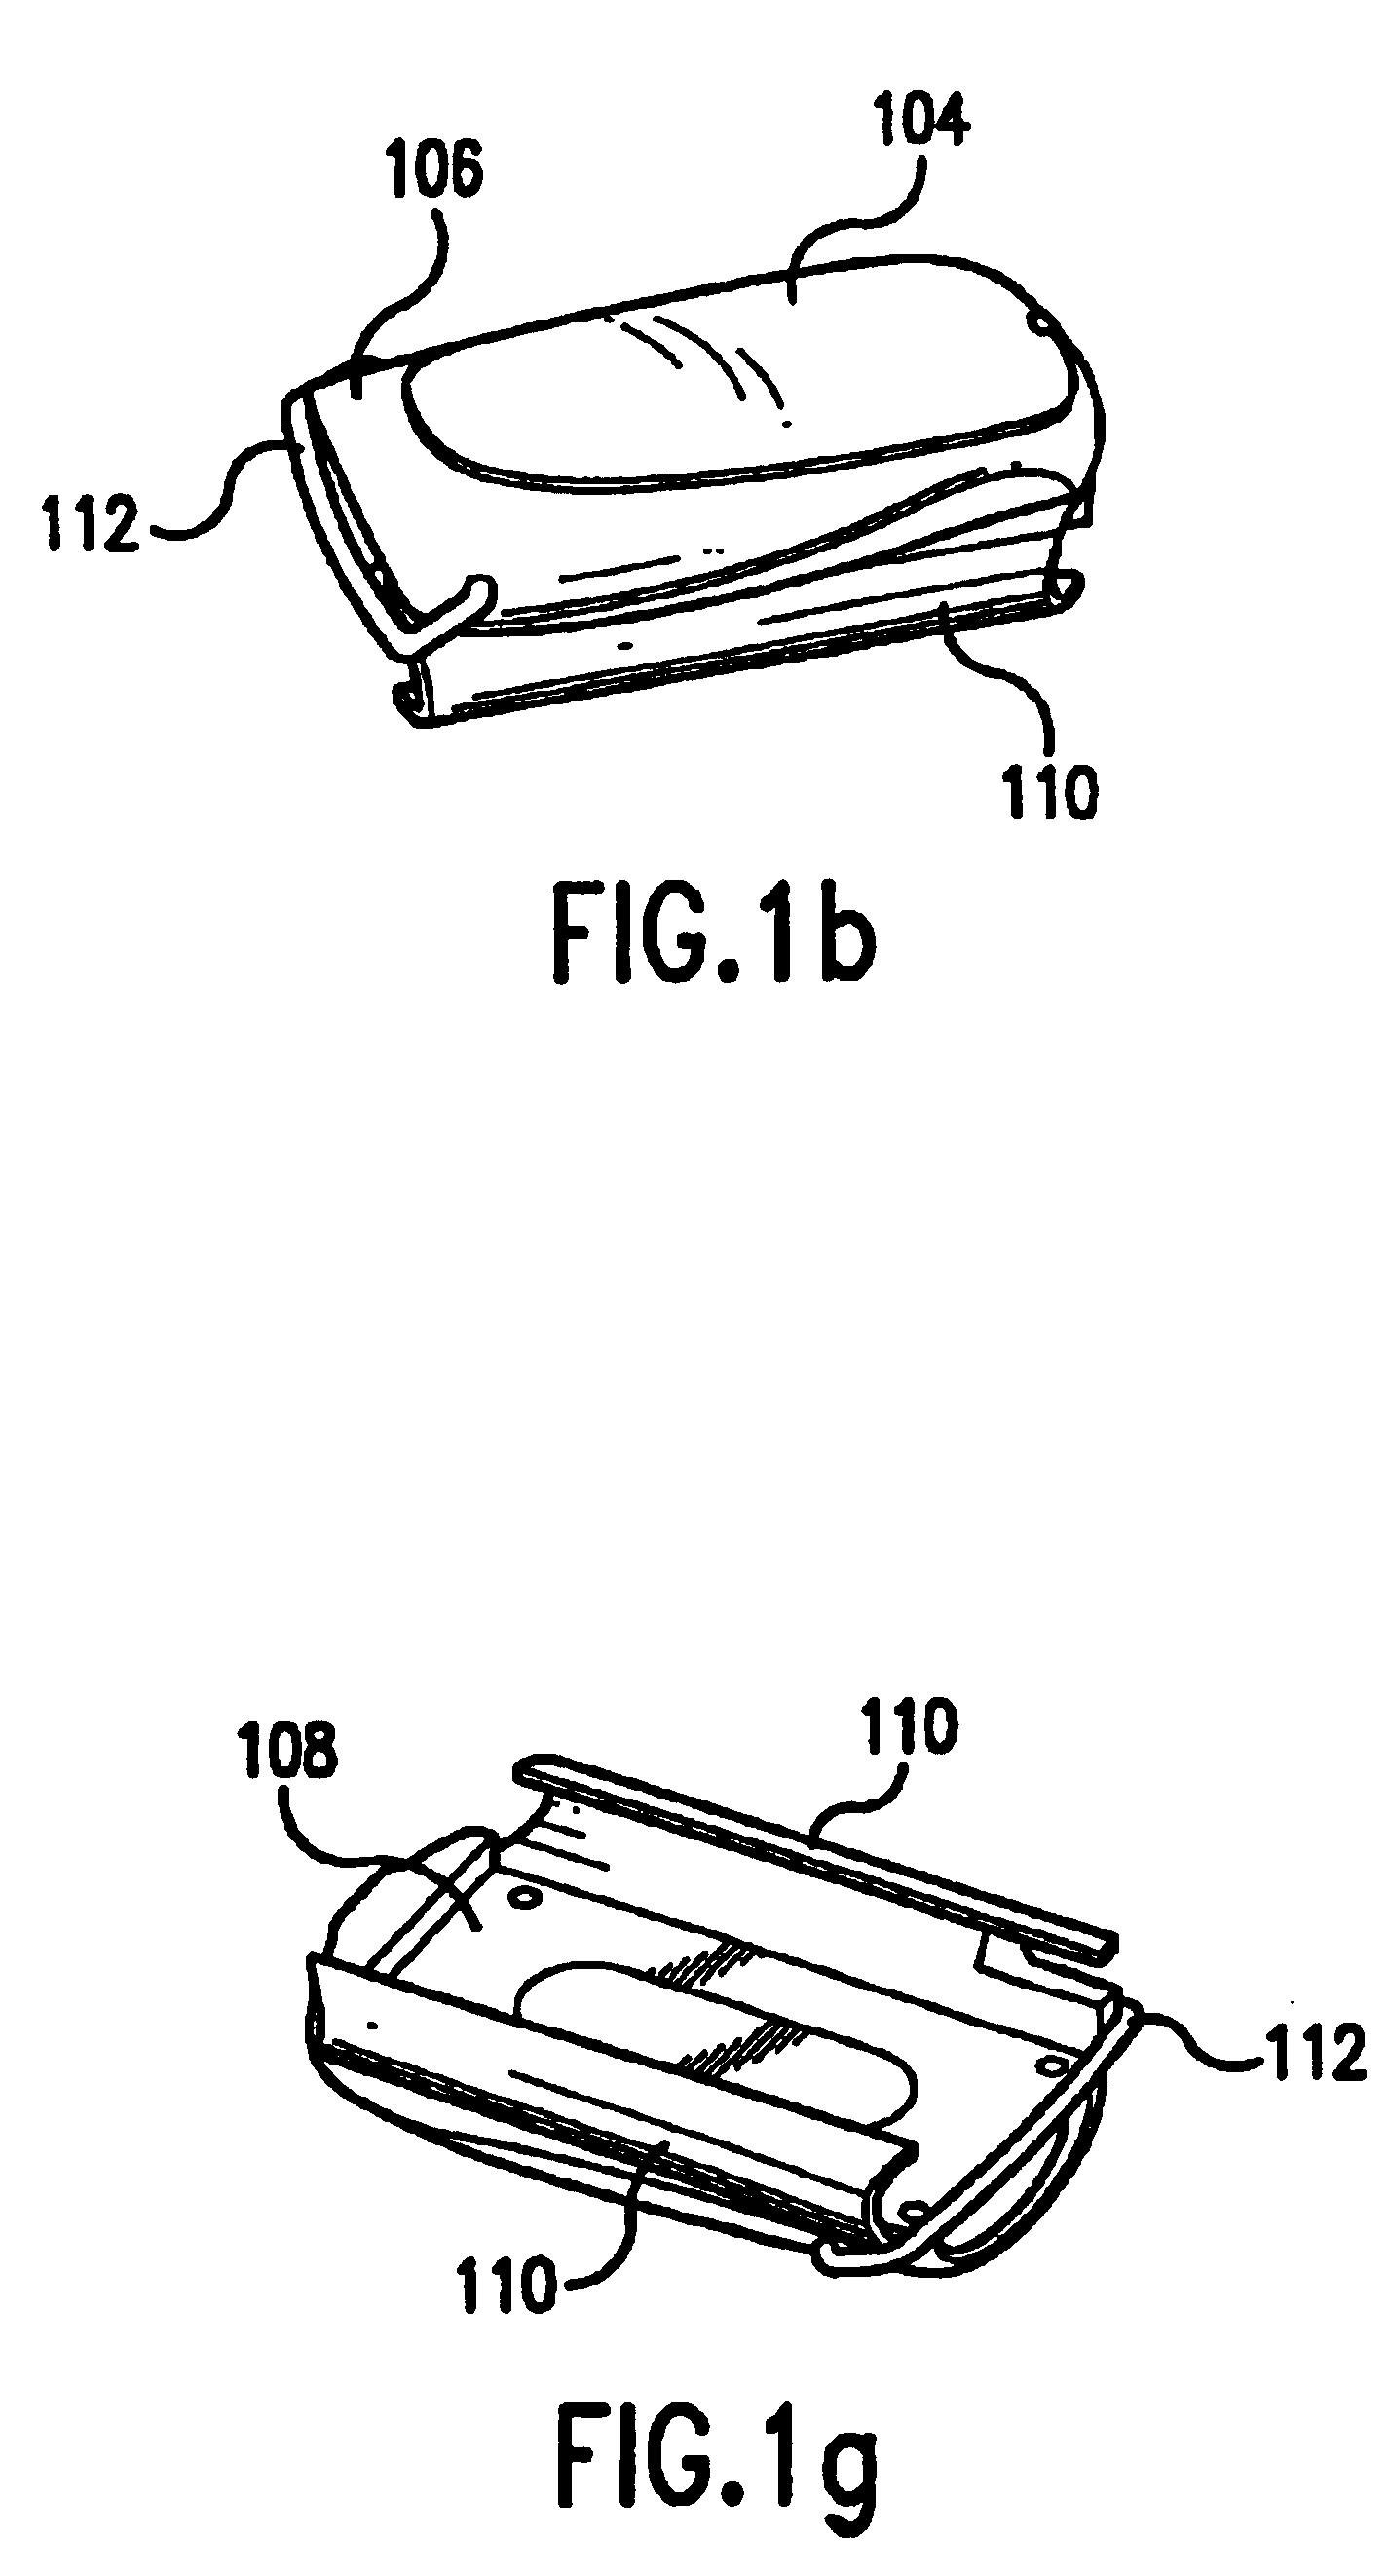 Adapter unit having a handle grip for a personal digital assistant